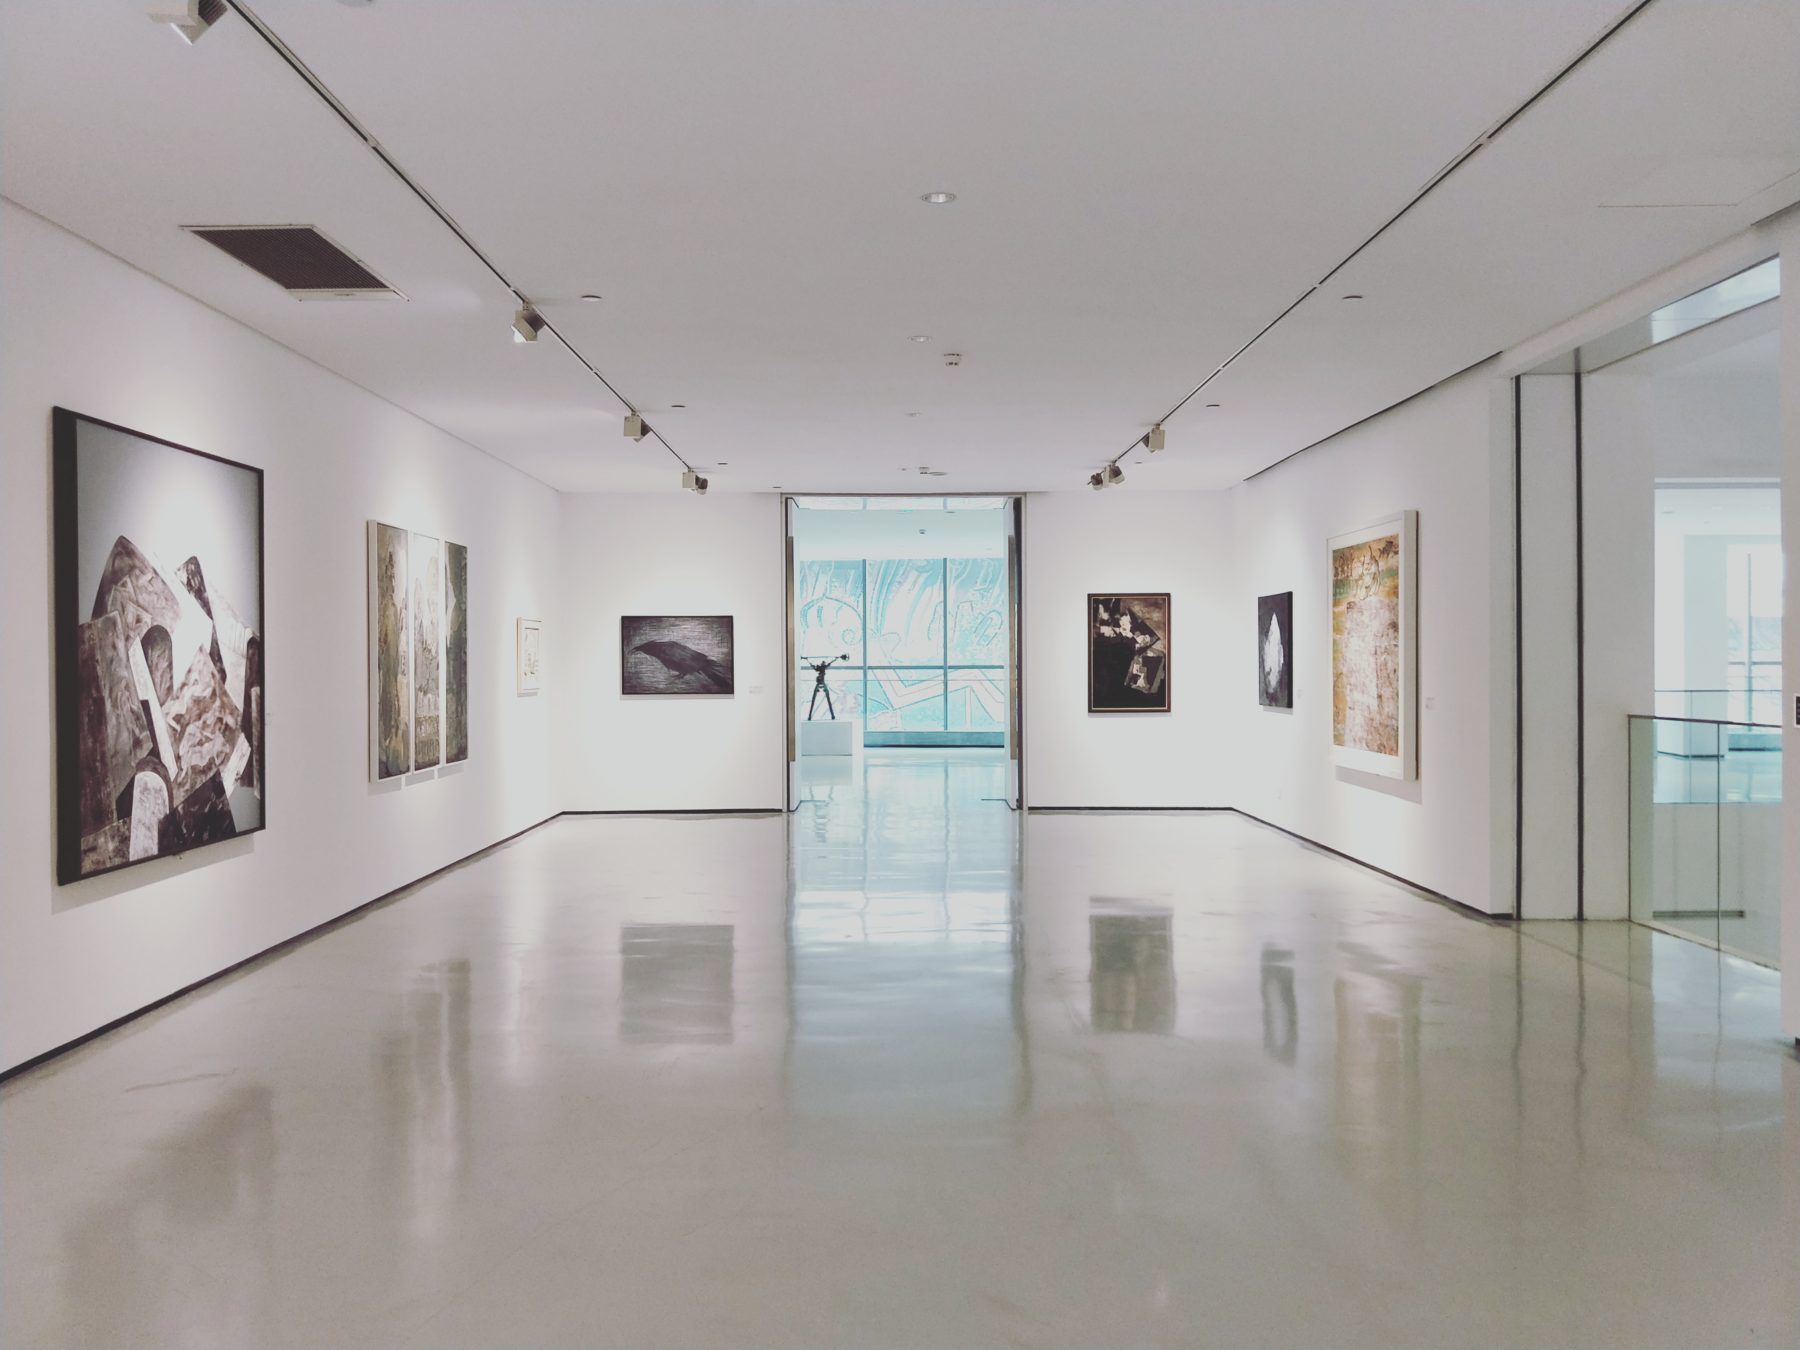 Image of an gallery space with white walls 